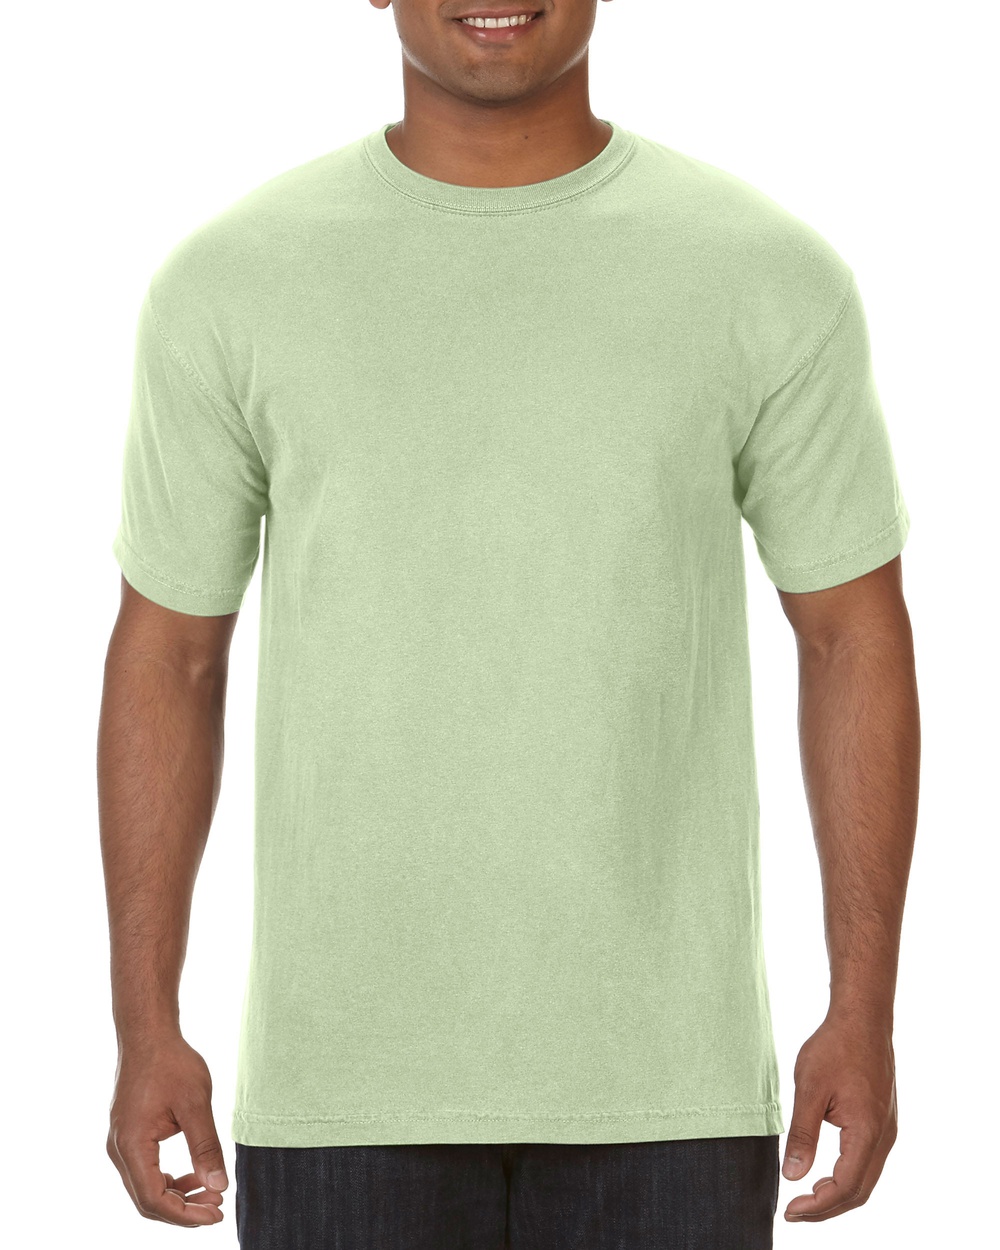 Comfort Colors C1717 Adult Heavyweight T-Shirt - Chalky Mint - S